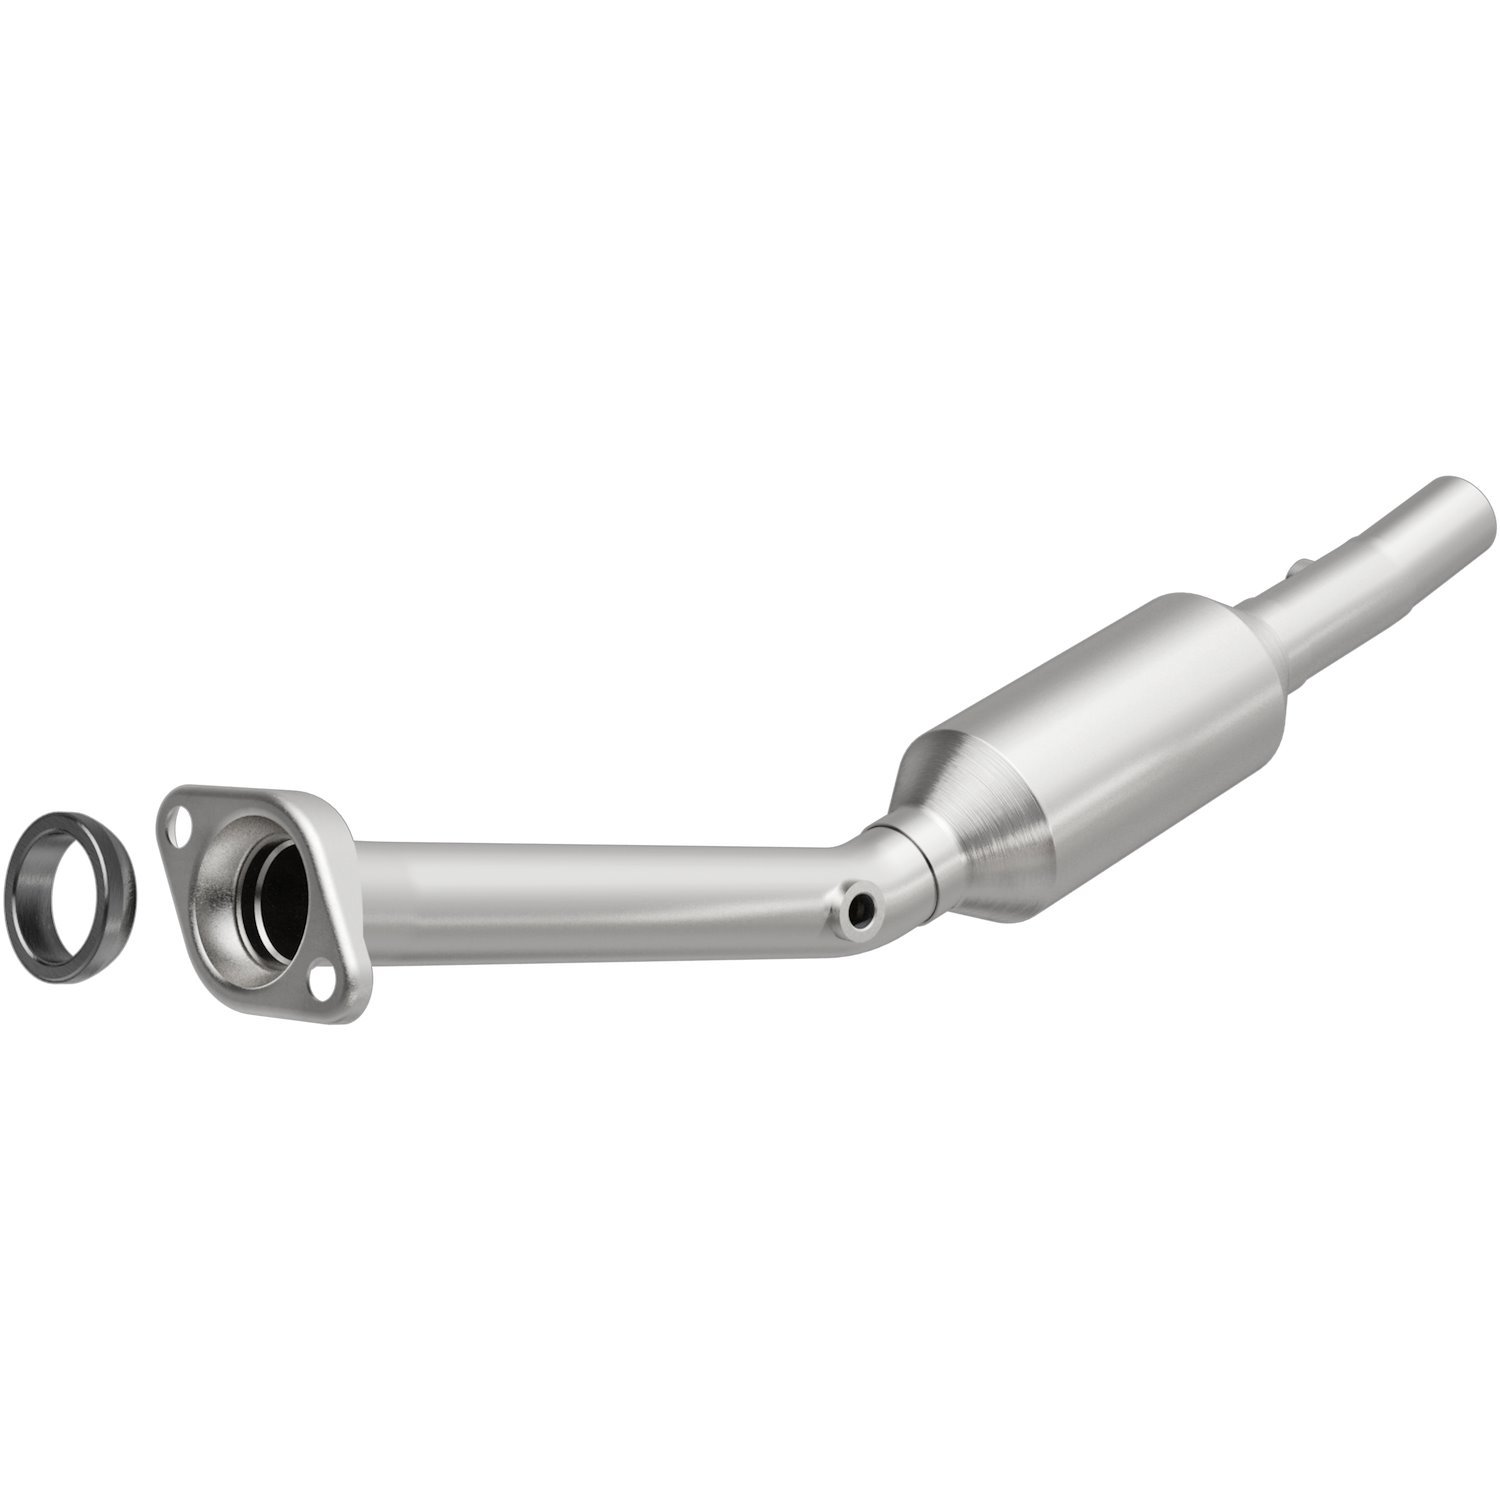 OEM Grade Federal / EPA Compliant Direct-Fit Catalytic Converter 51821